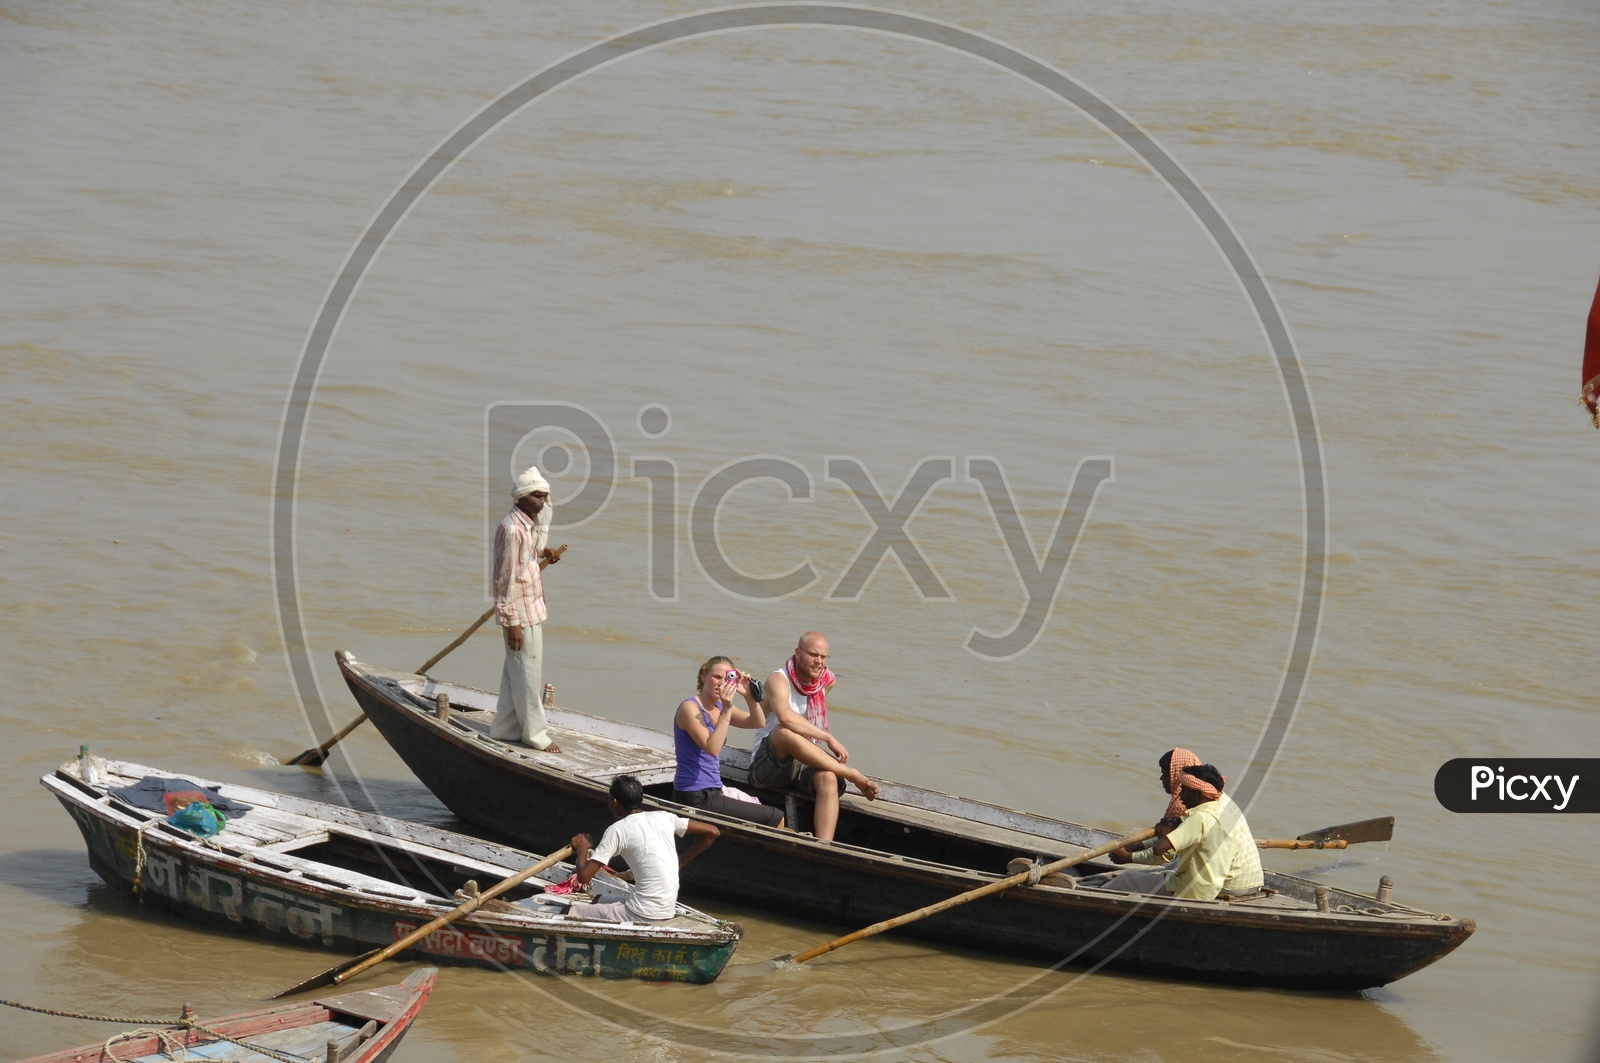 Foreigners On the Sailing Boats of varanasi